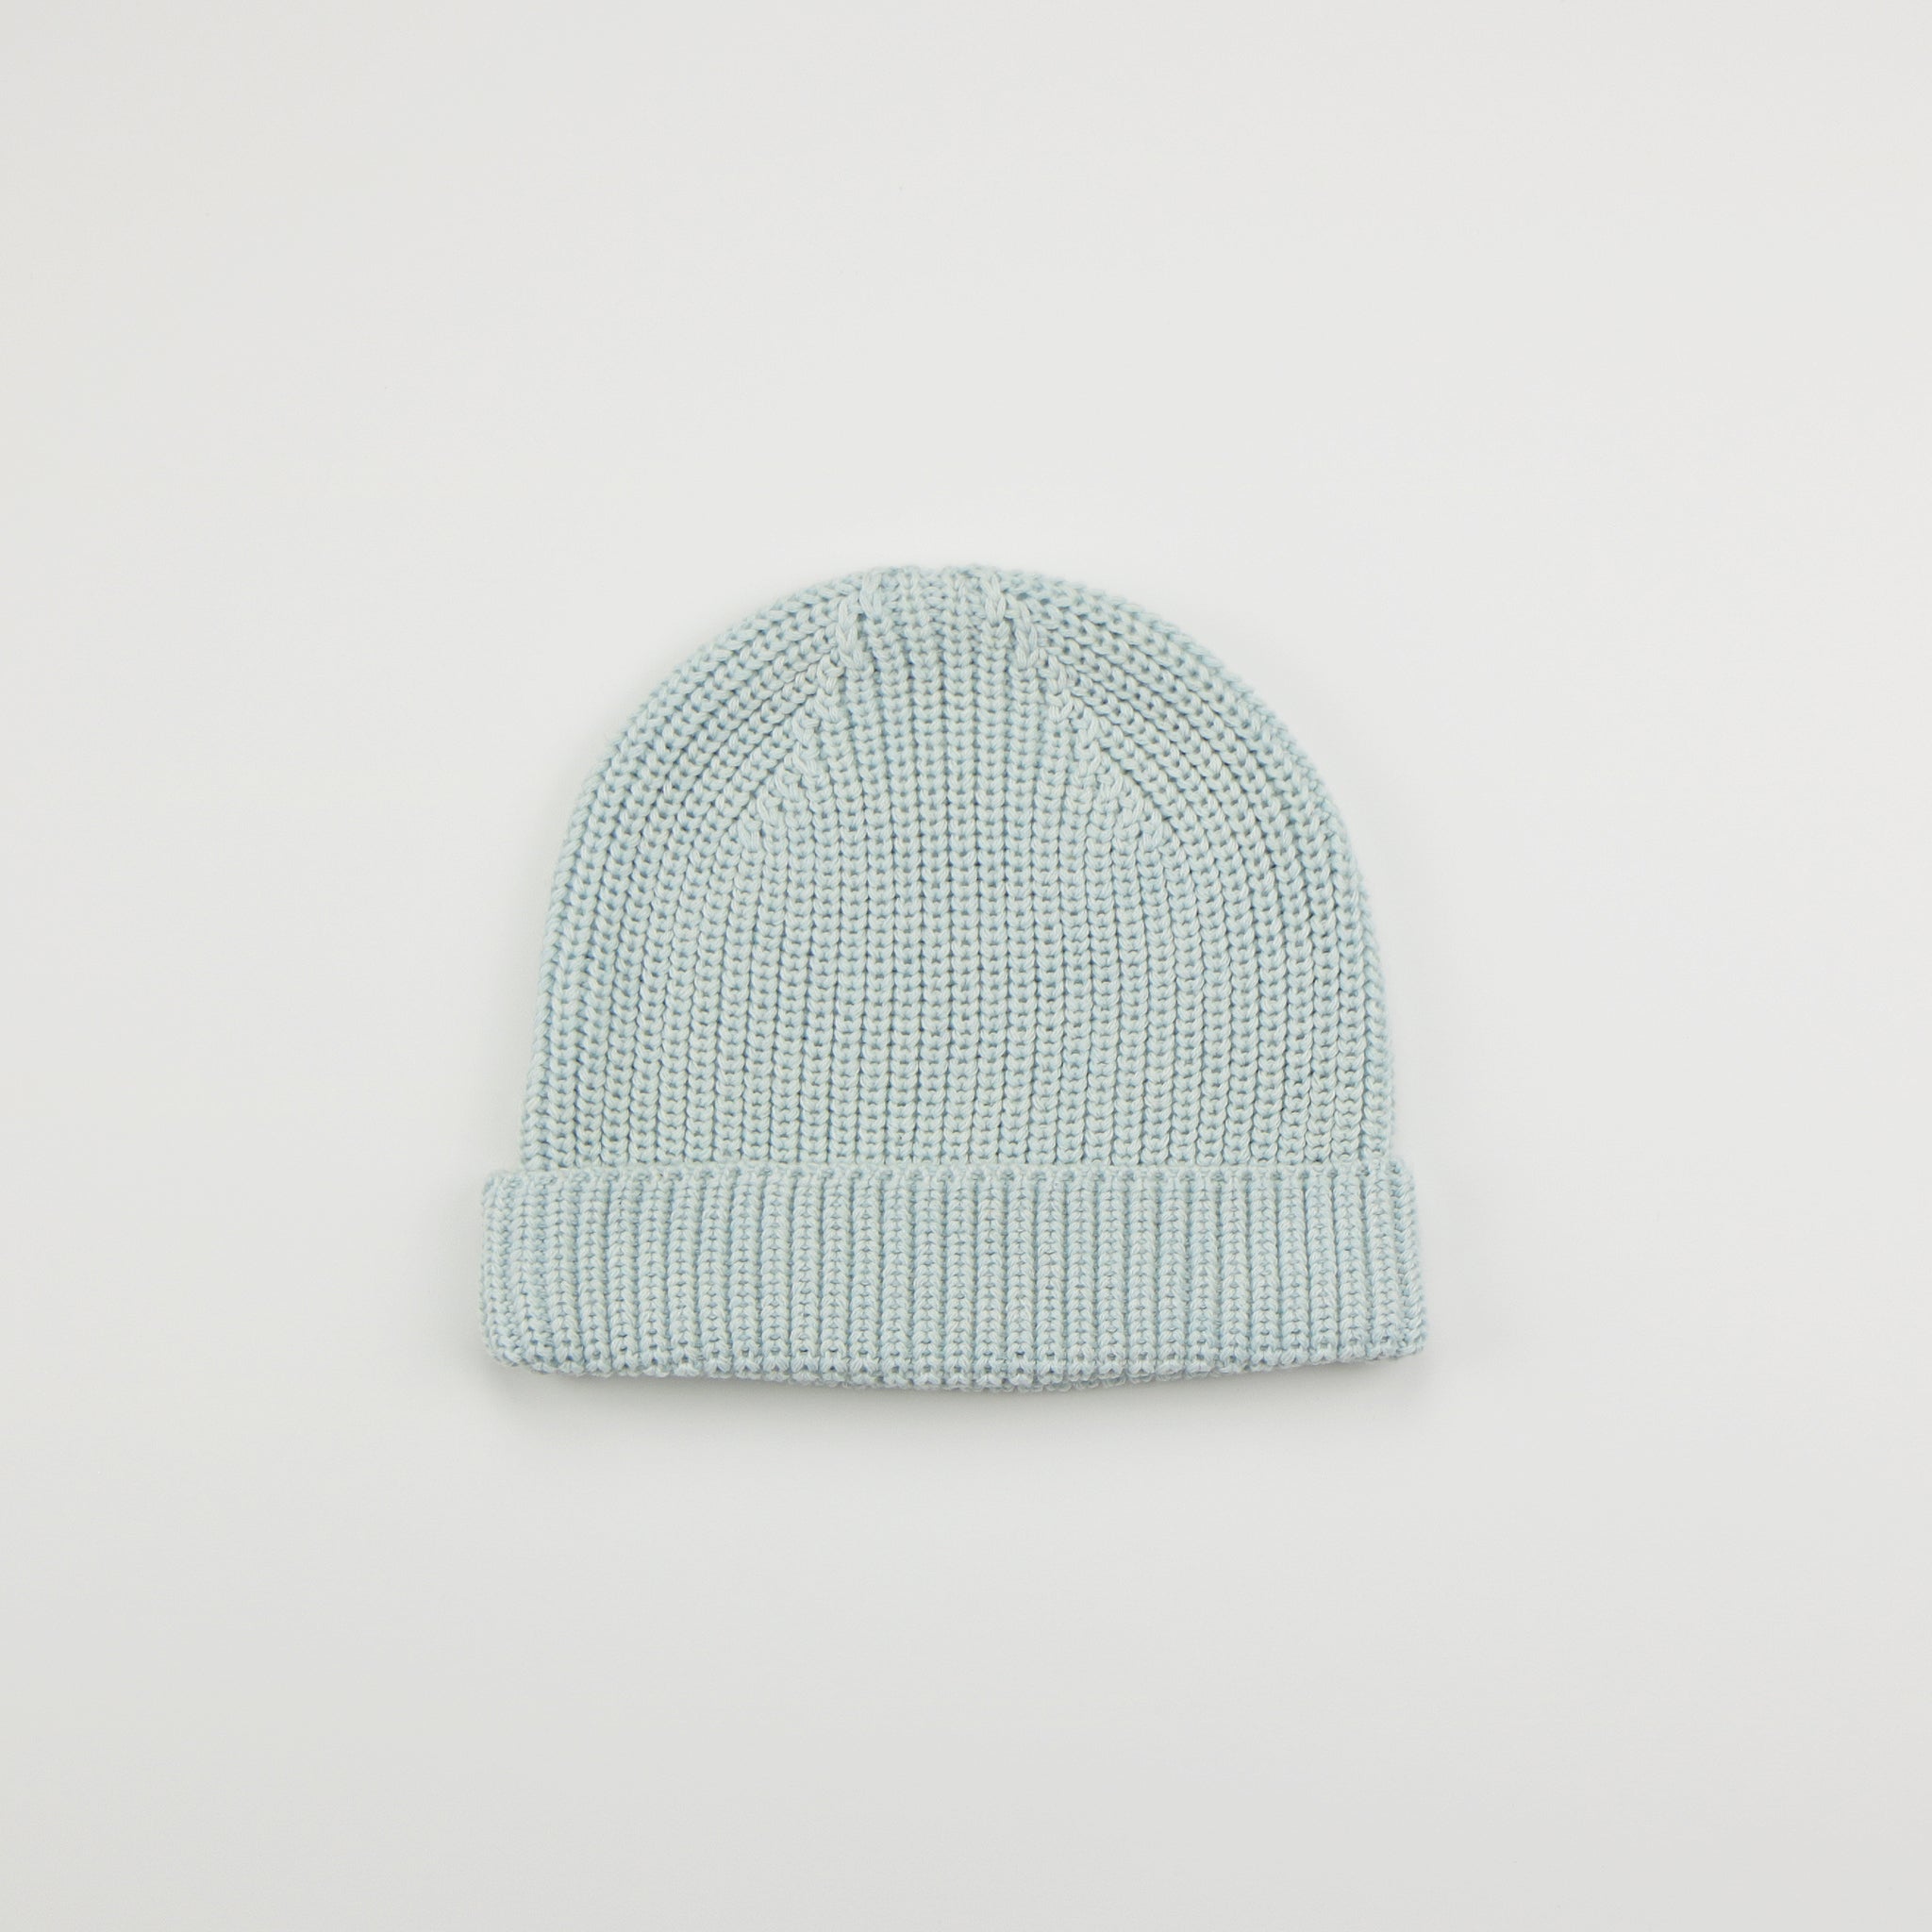 Knitted Beanie Hat - Icy Mint